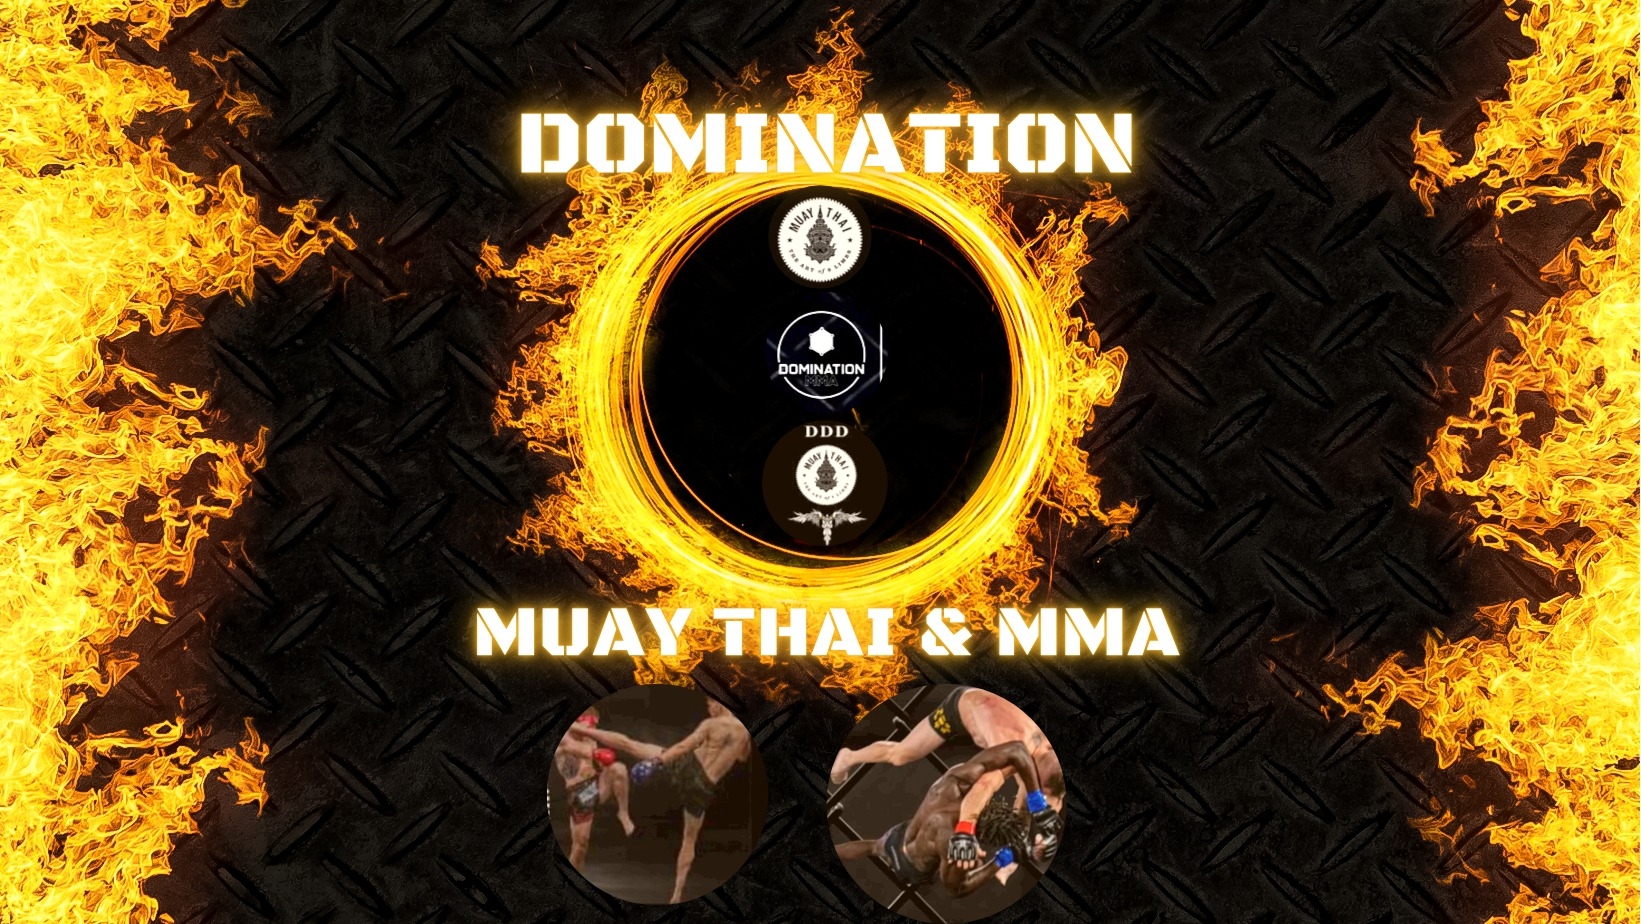 Image with flames, fighters and text: Domination Muay Thai and MMA.